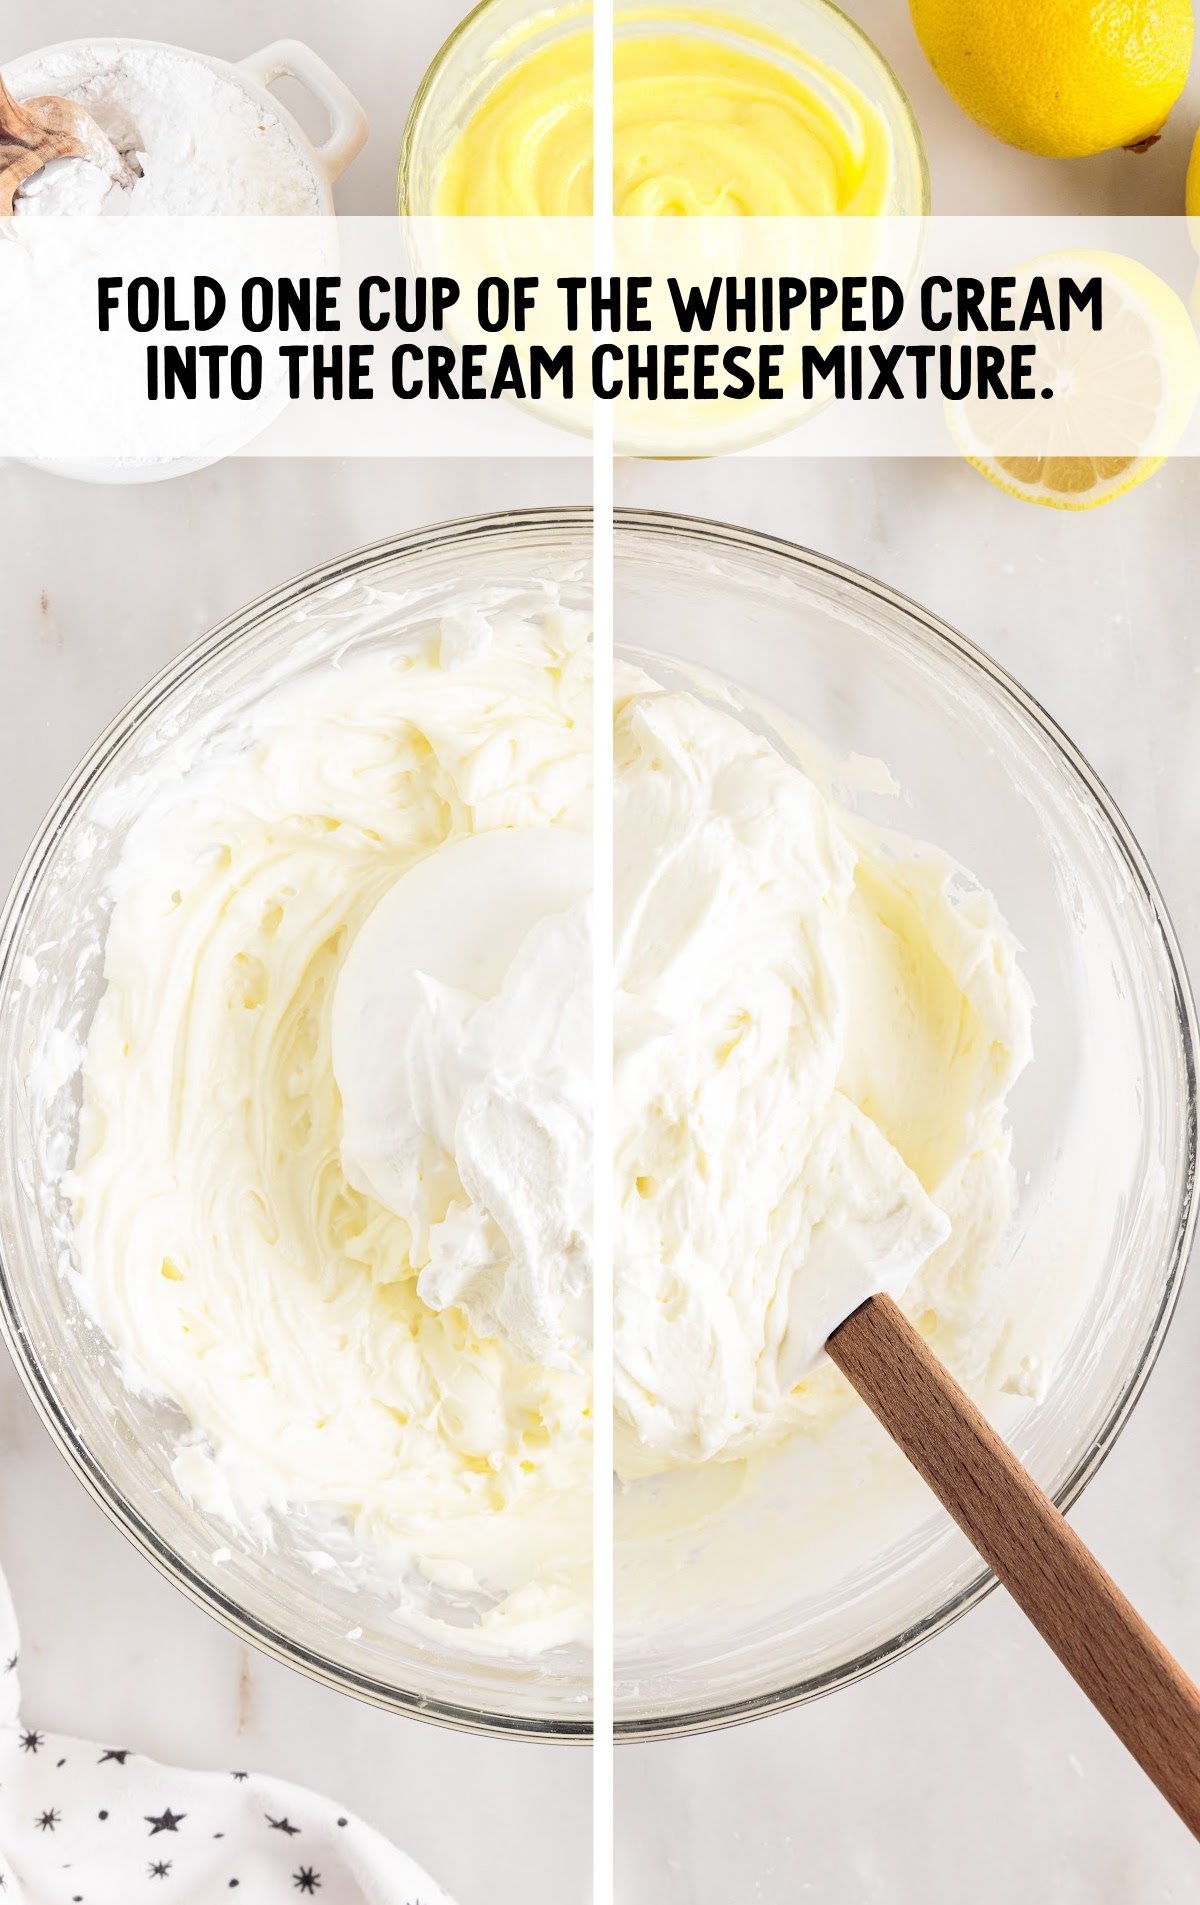 whipped cream folded with the cream cheese mixture in a bowl